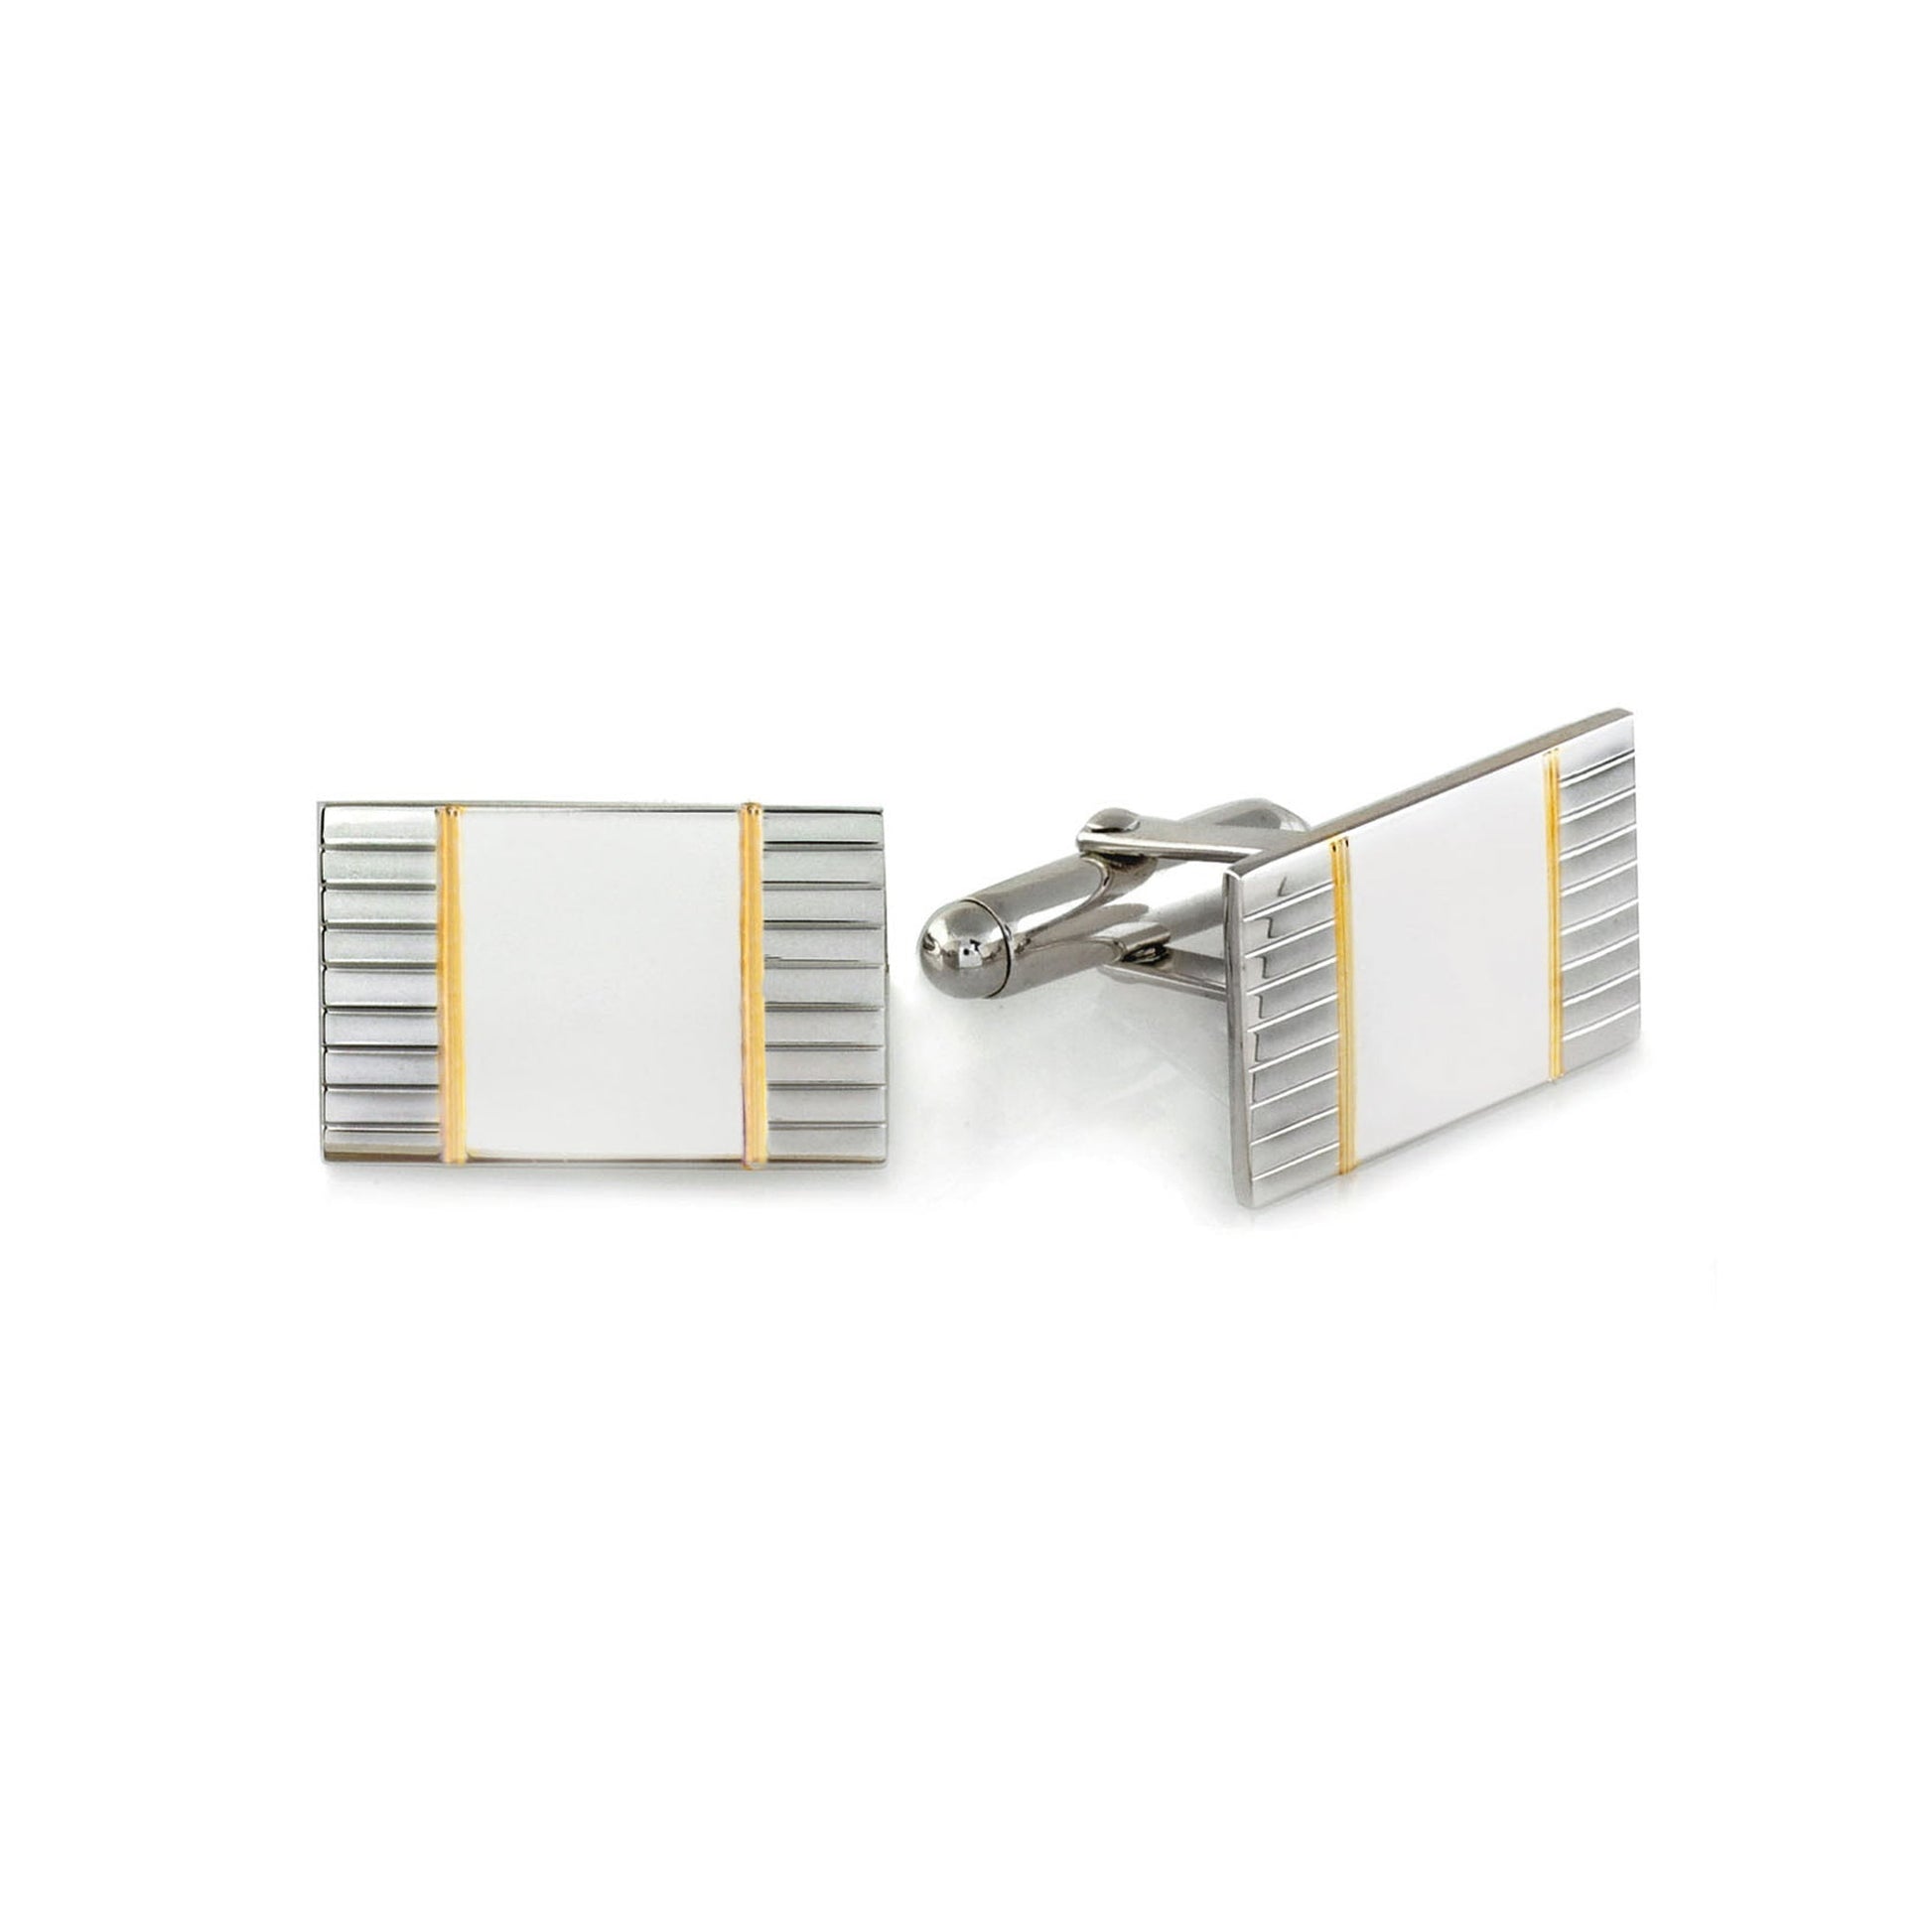 A sterling silver two color cufflinks displayed on a neutral white background.